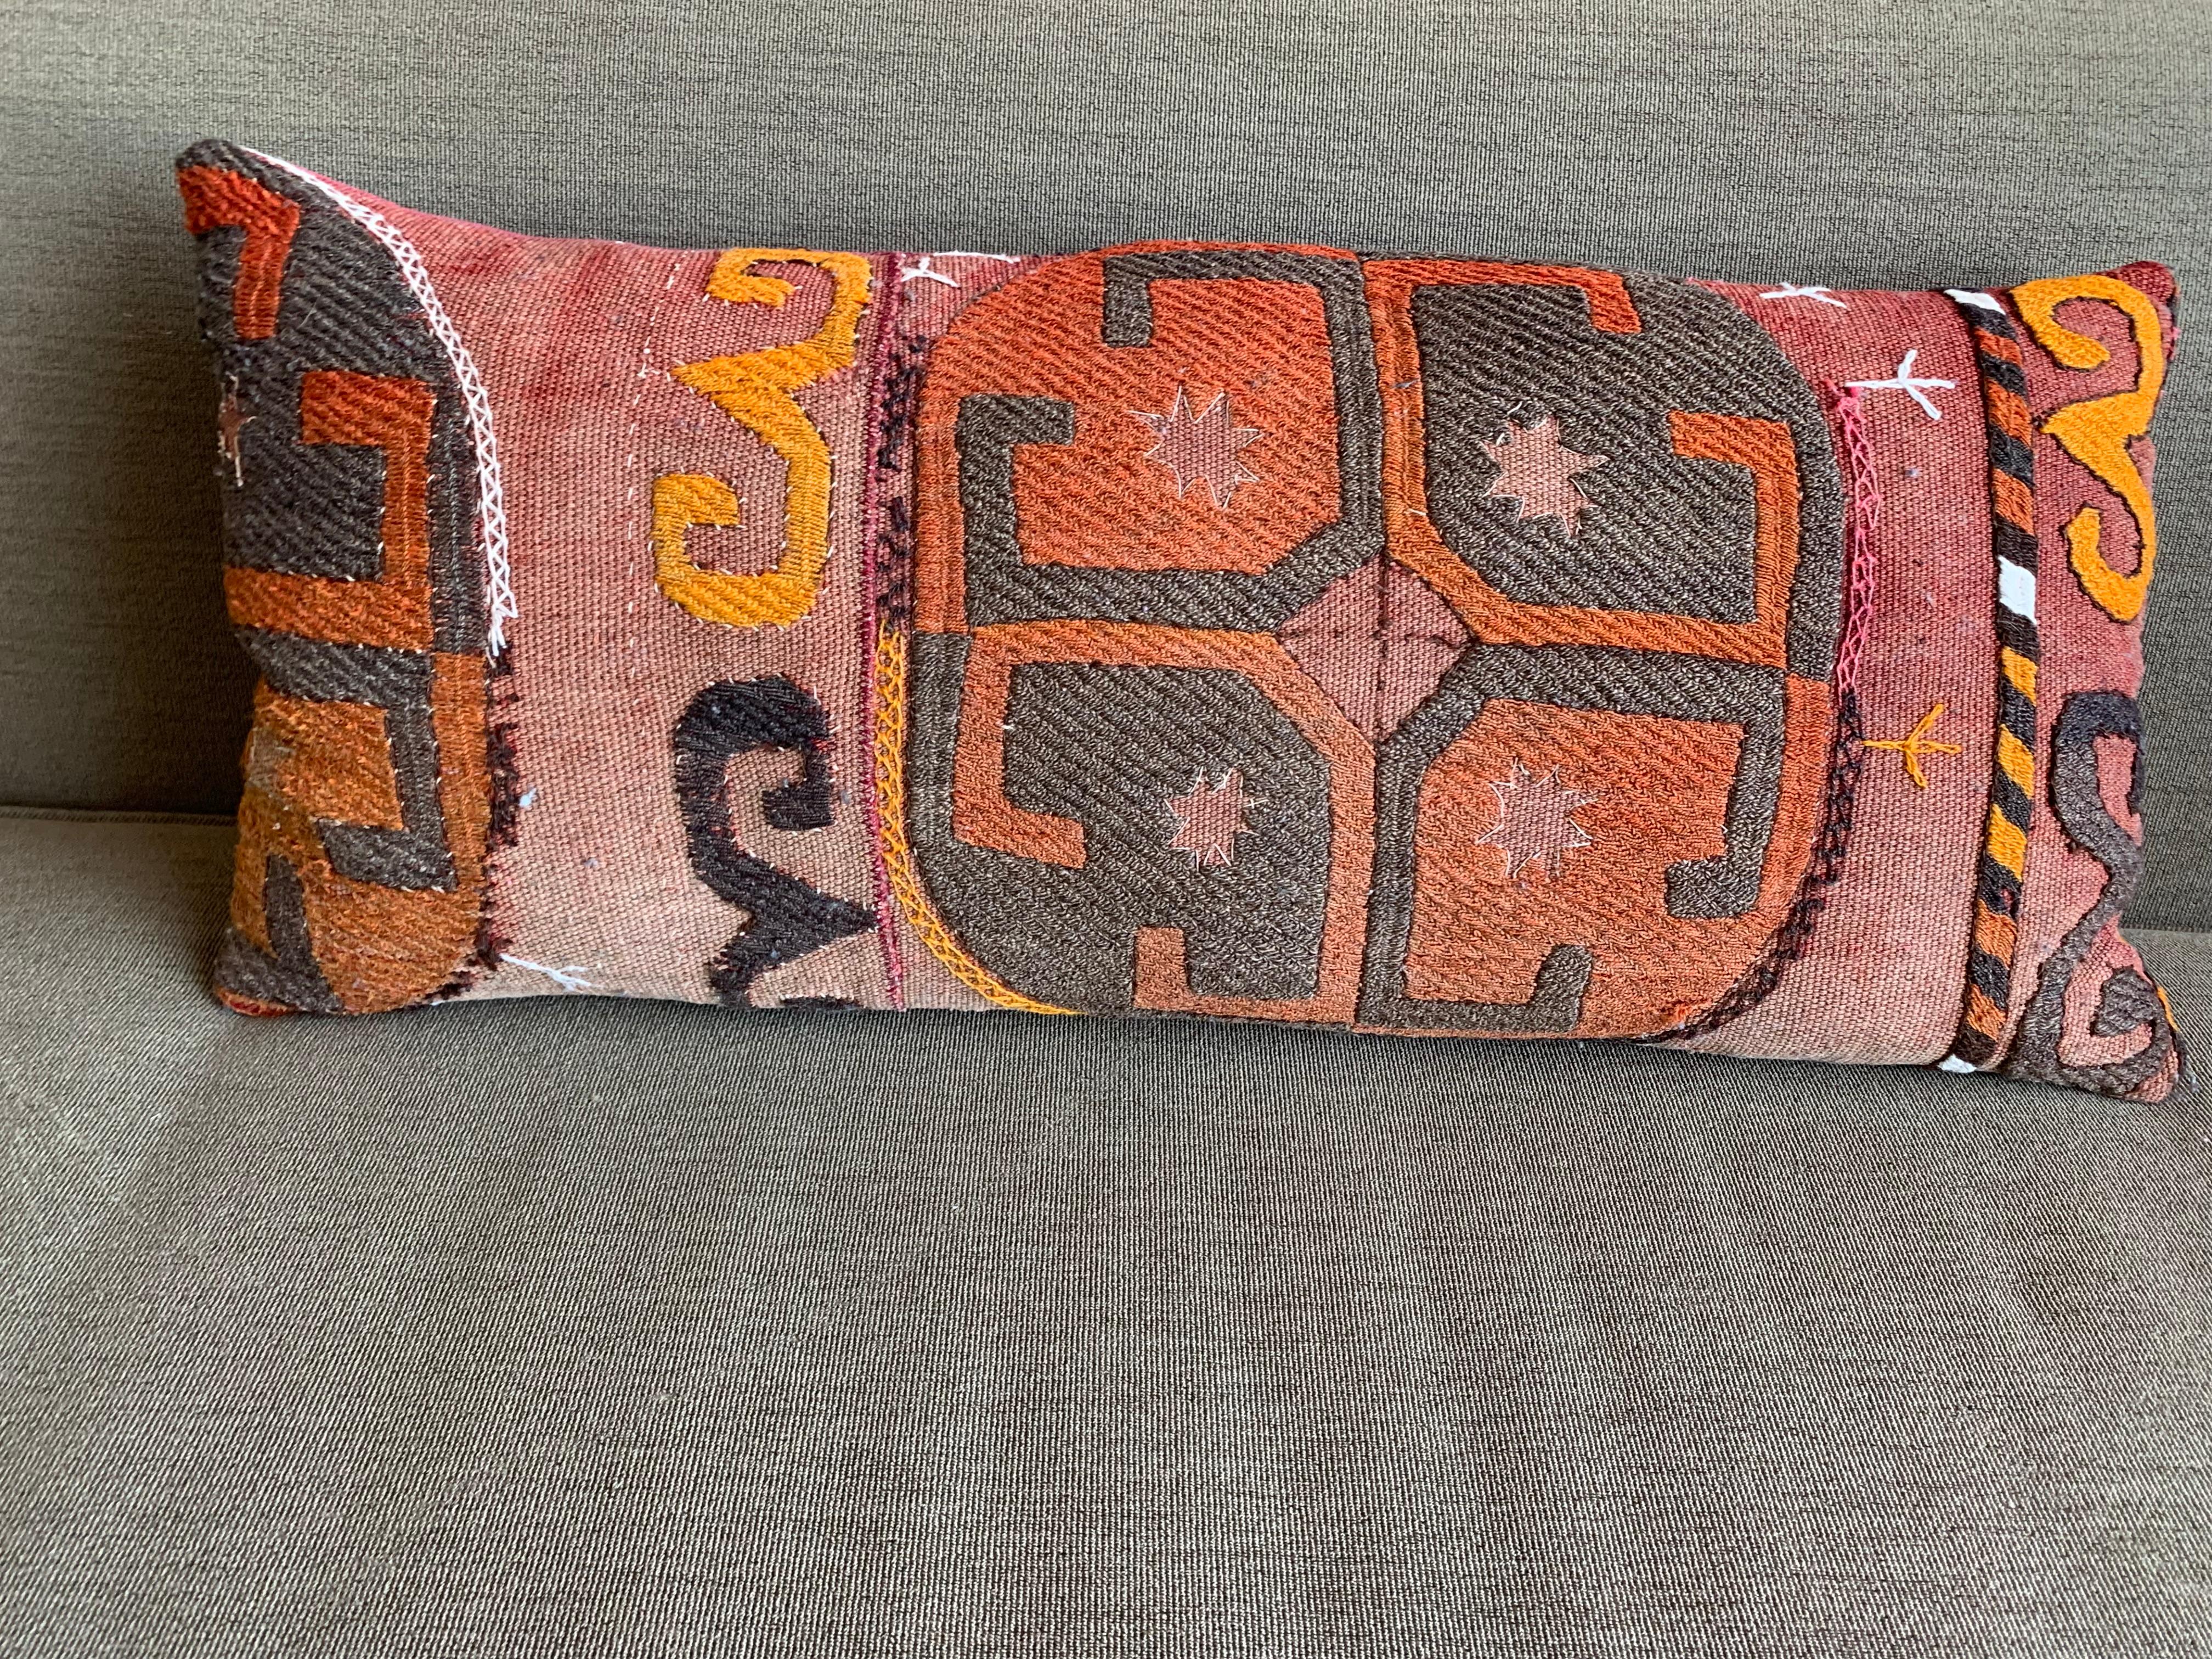 Vintage handmade Oblong pillow 3 available
gorgeous handmade pillow,
antique Turkish rugs crafted into gorgeous oblong pillows.
three available; see my shop
handstitched wool with rich earth tones
down filled
abstract design.